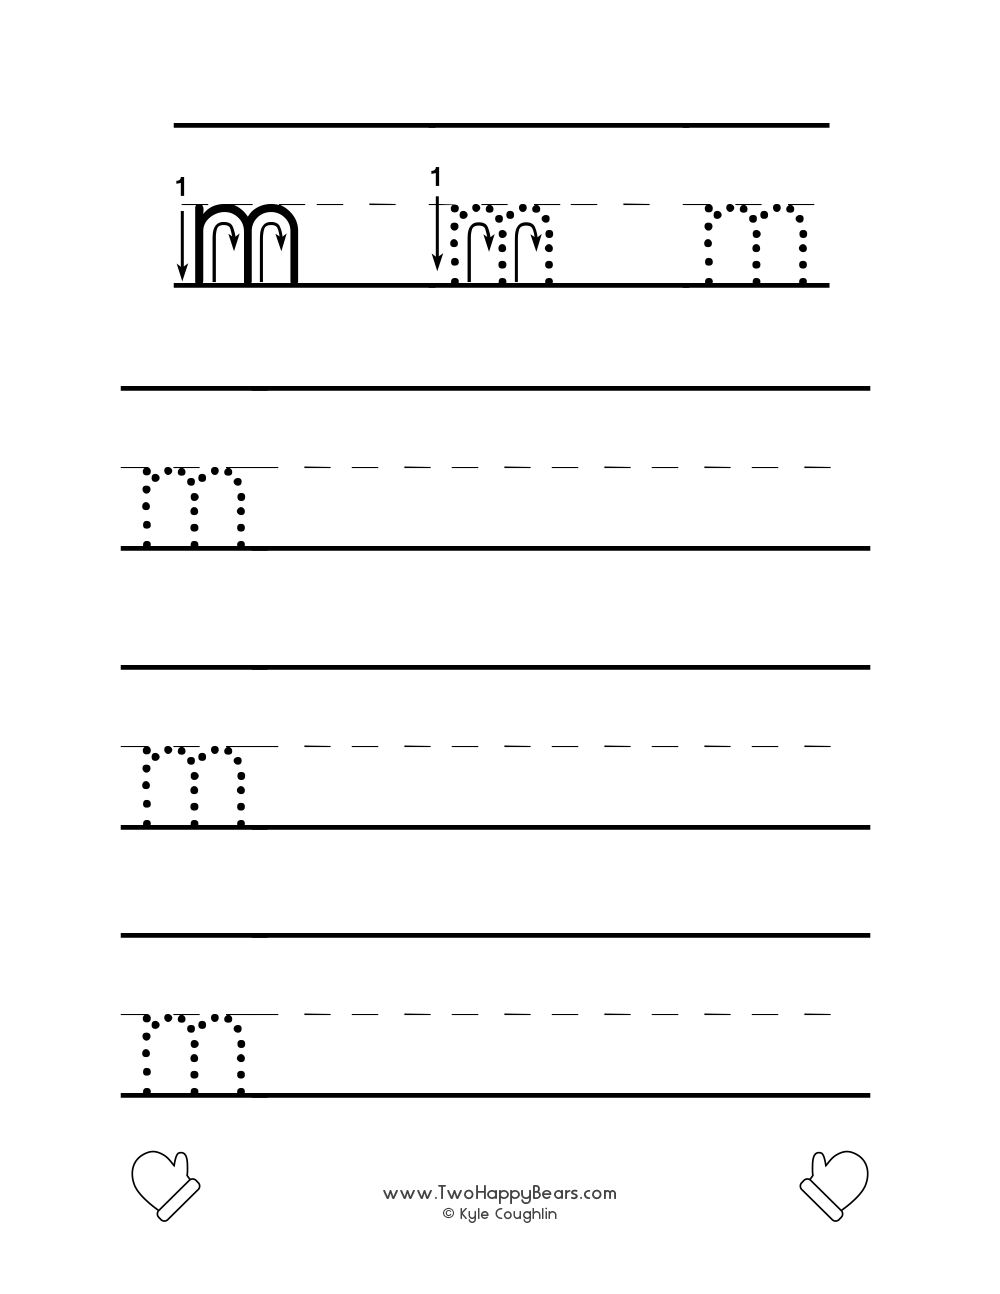 Worksheet for tracing and writing the lowercase letter M, in free printable PDF format.